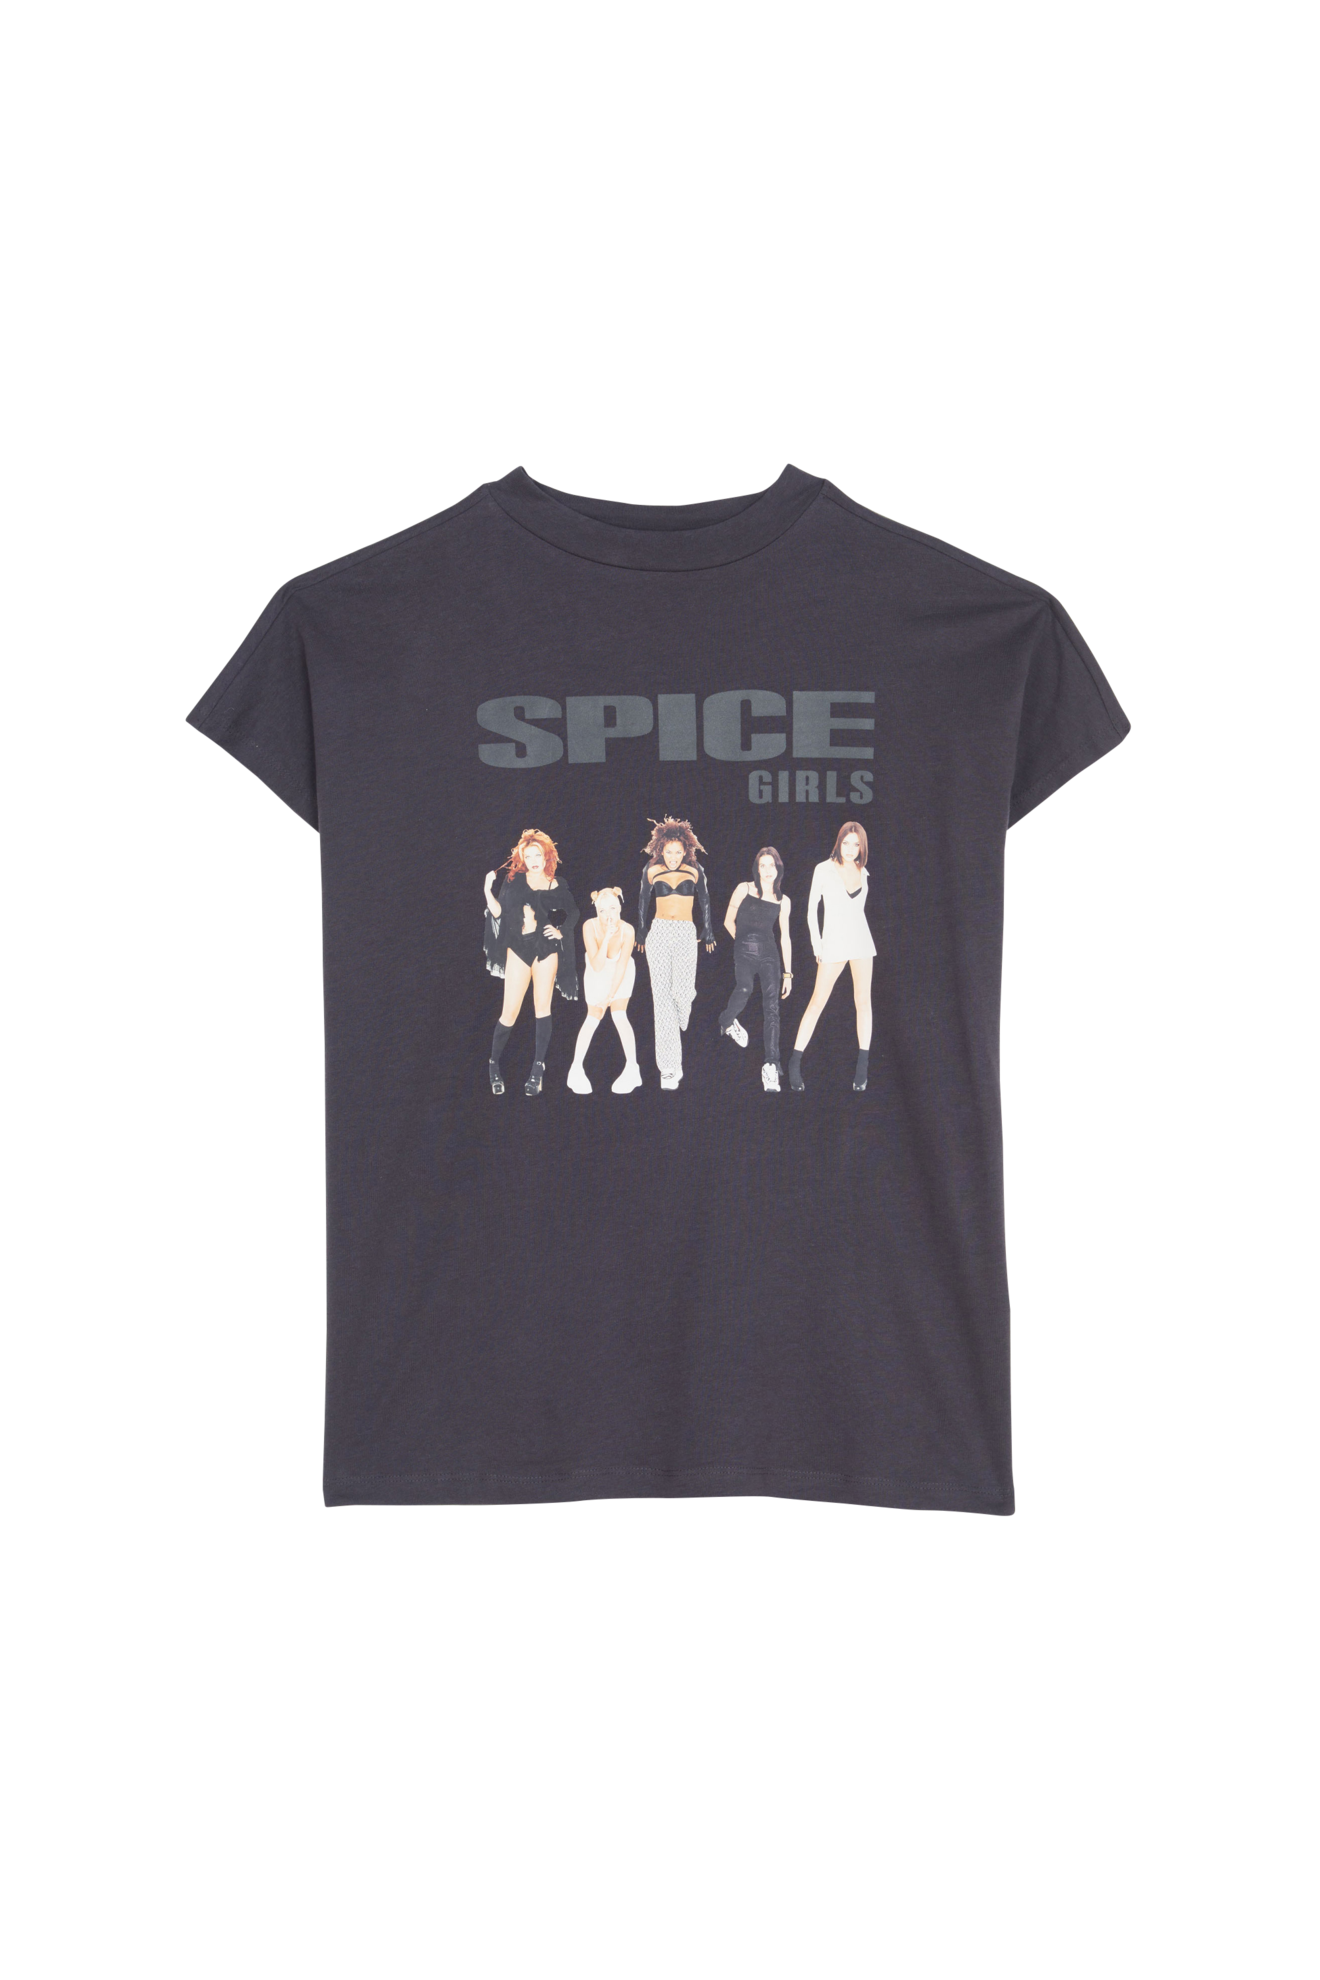 nmhailey spice girls s/s top license fwd - t-shirt